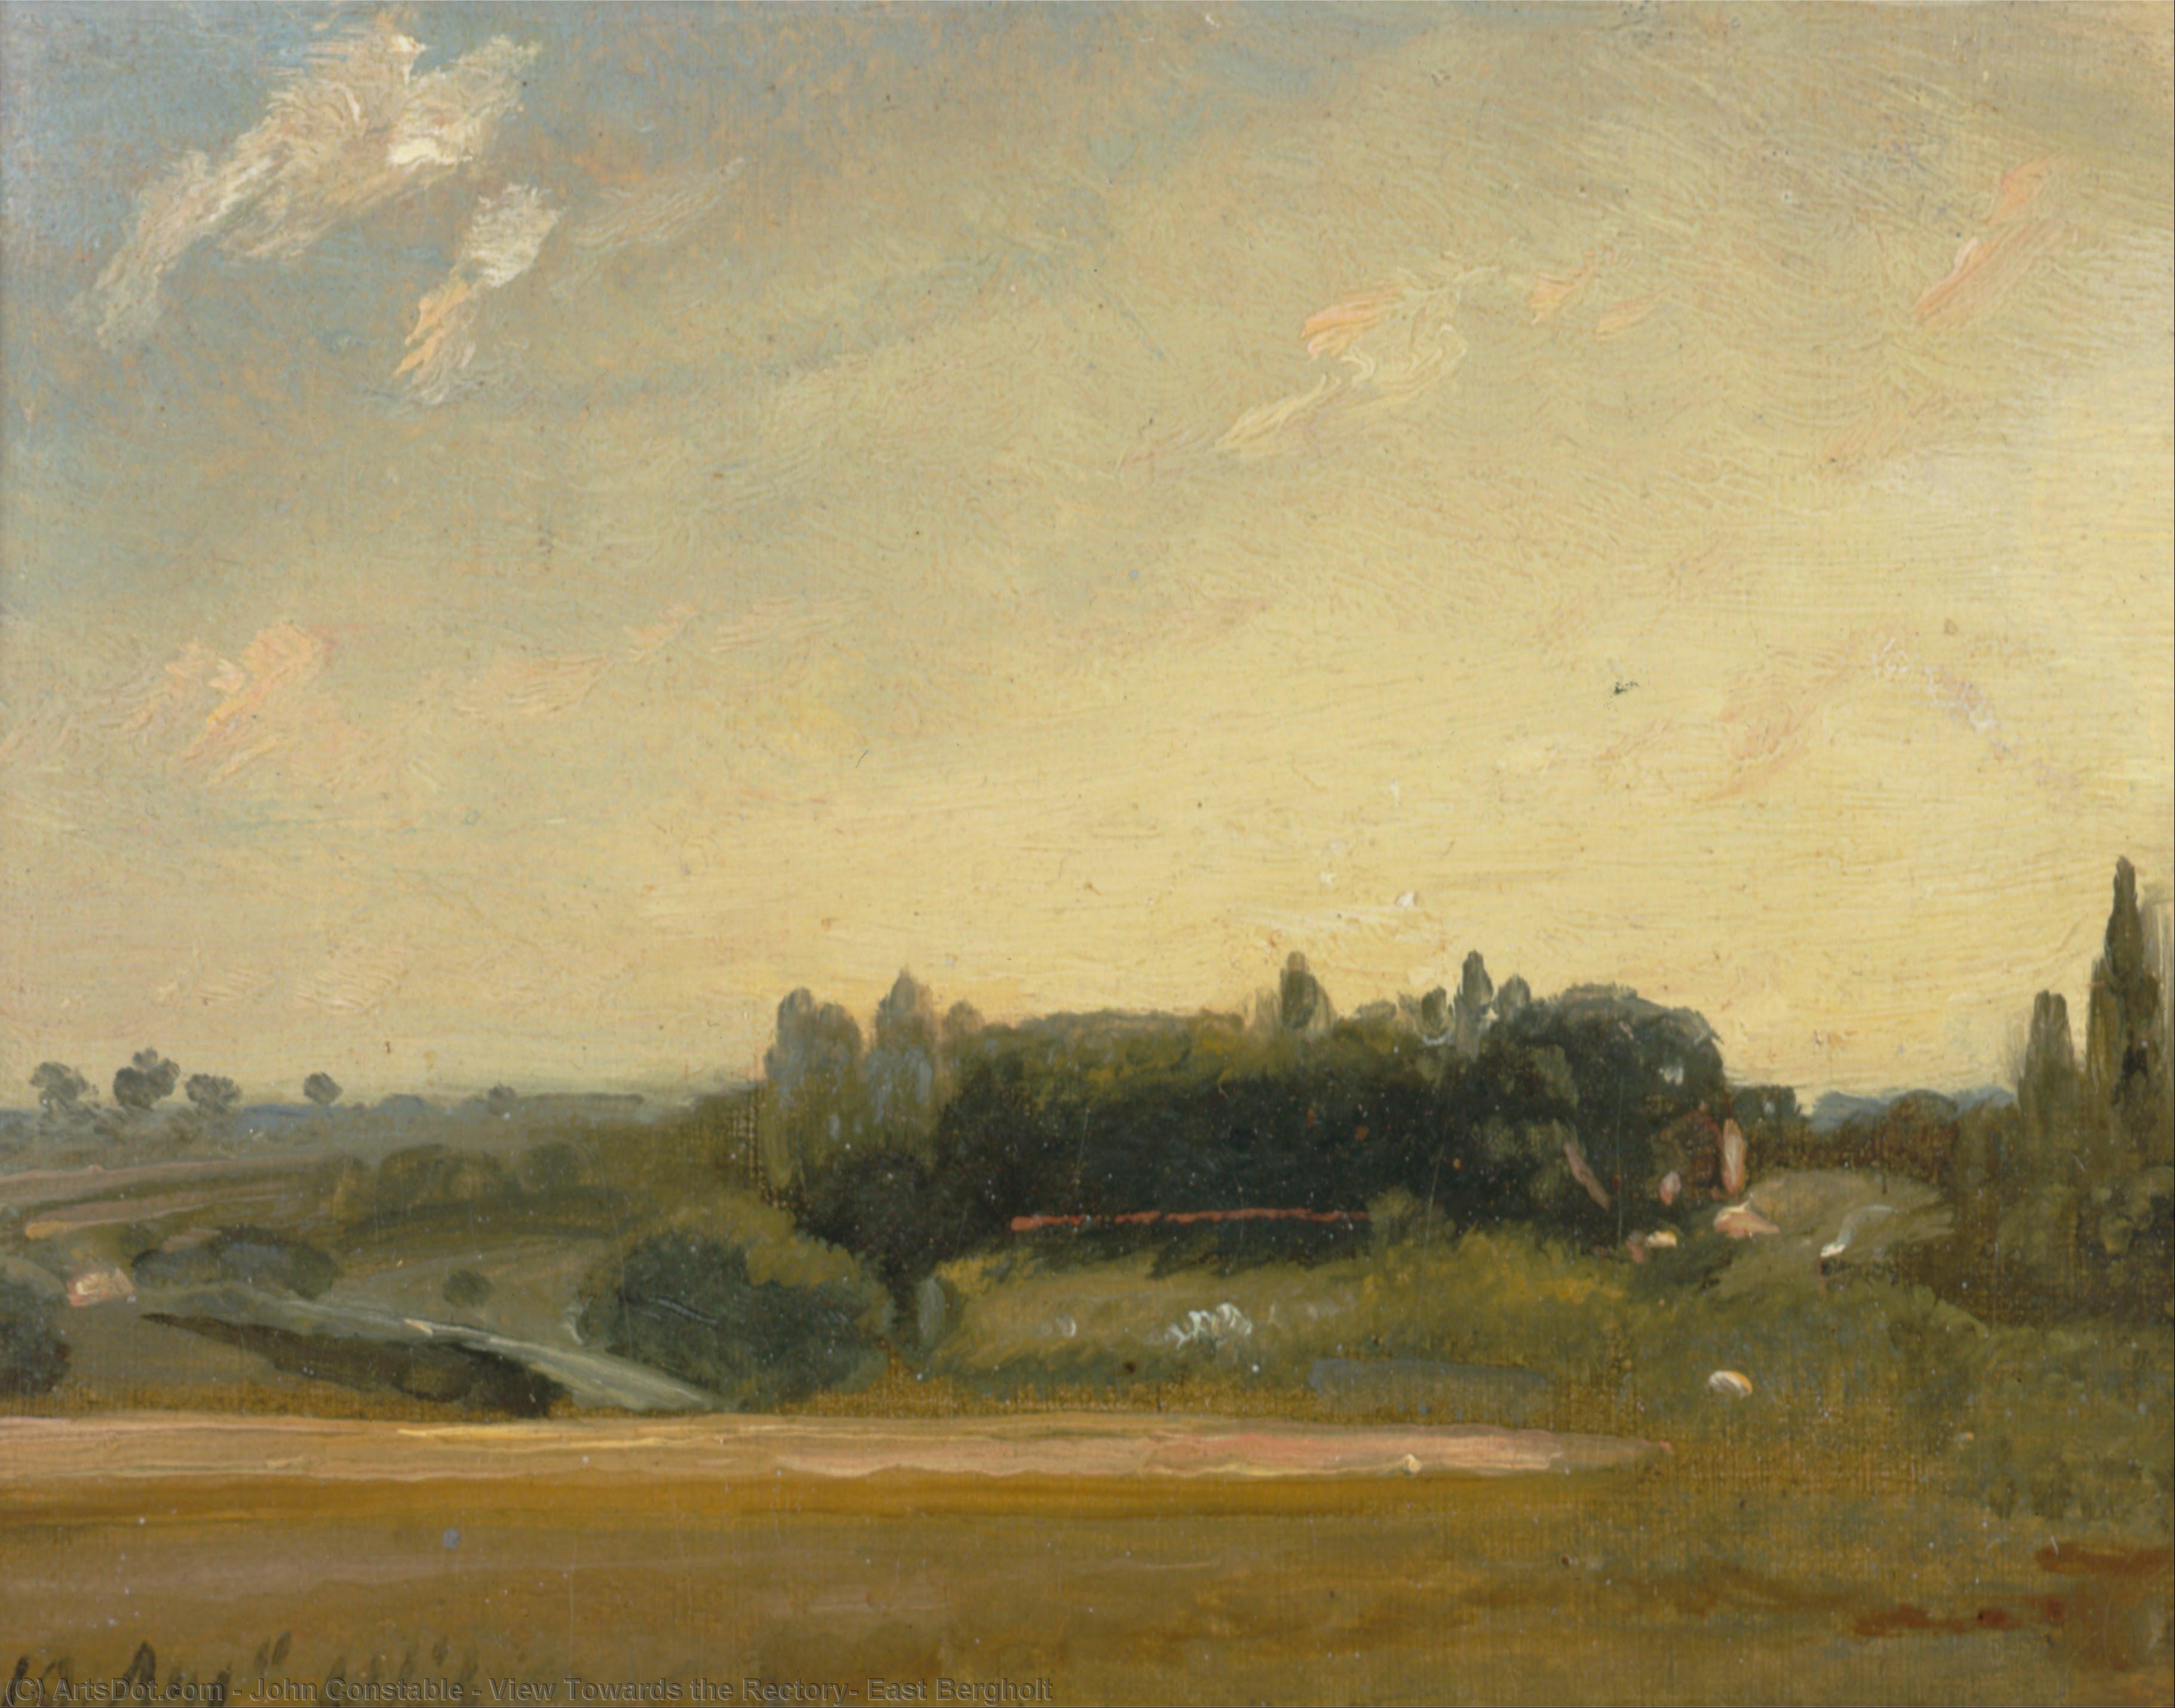 Wikioo.org - สารานุกรมวิจิตรศิลป์ - จิตรกรรม John Constable - View Towards the Rectory, East Bergholt